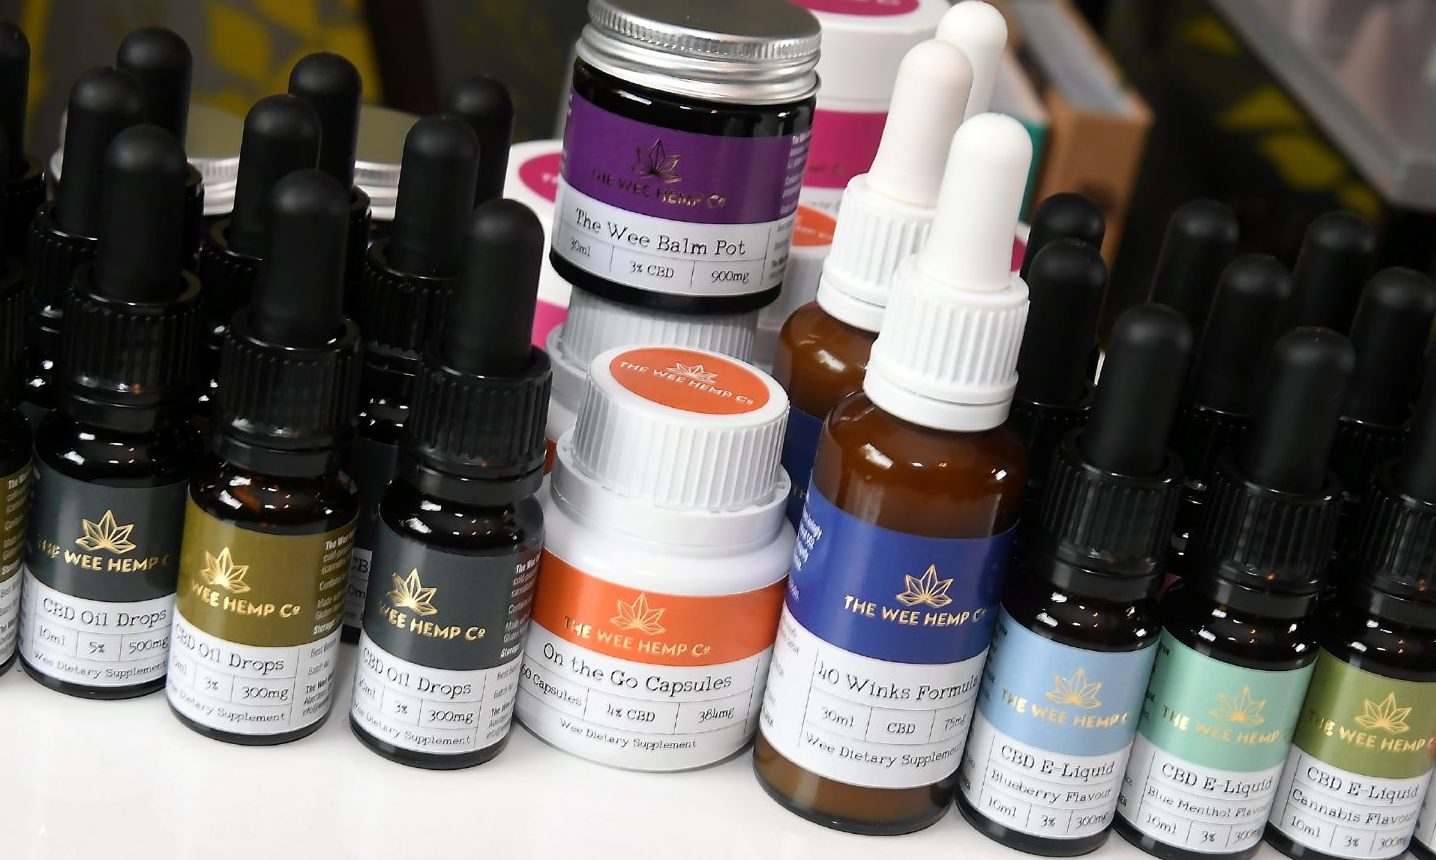 A wide range of products using CBD have appeared on the market in recent years.